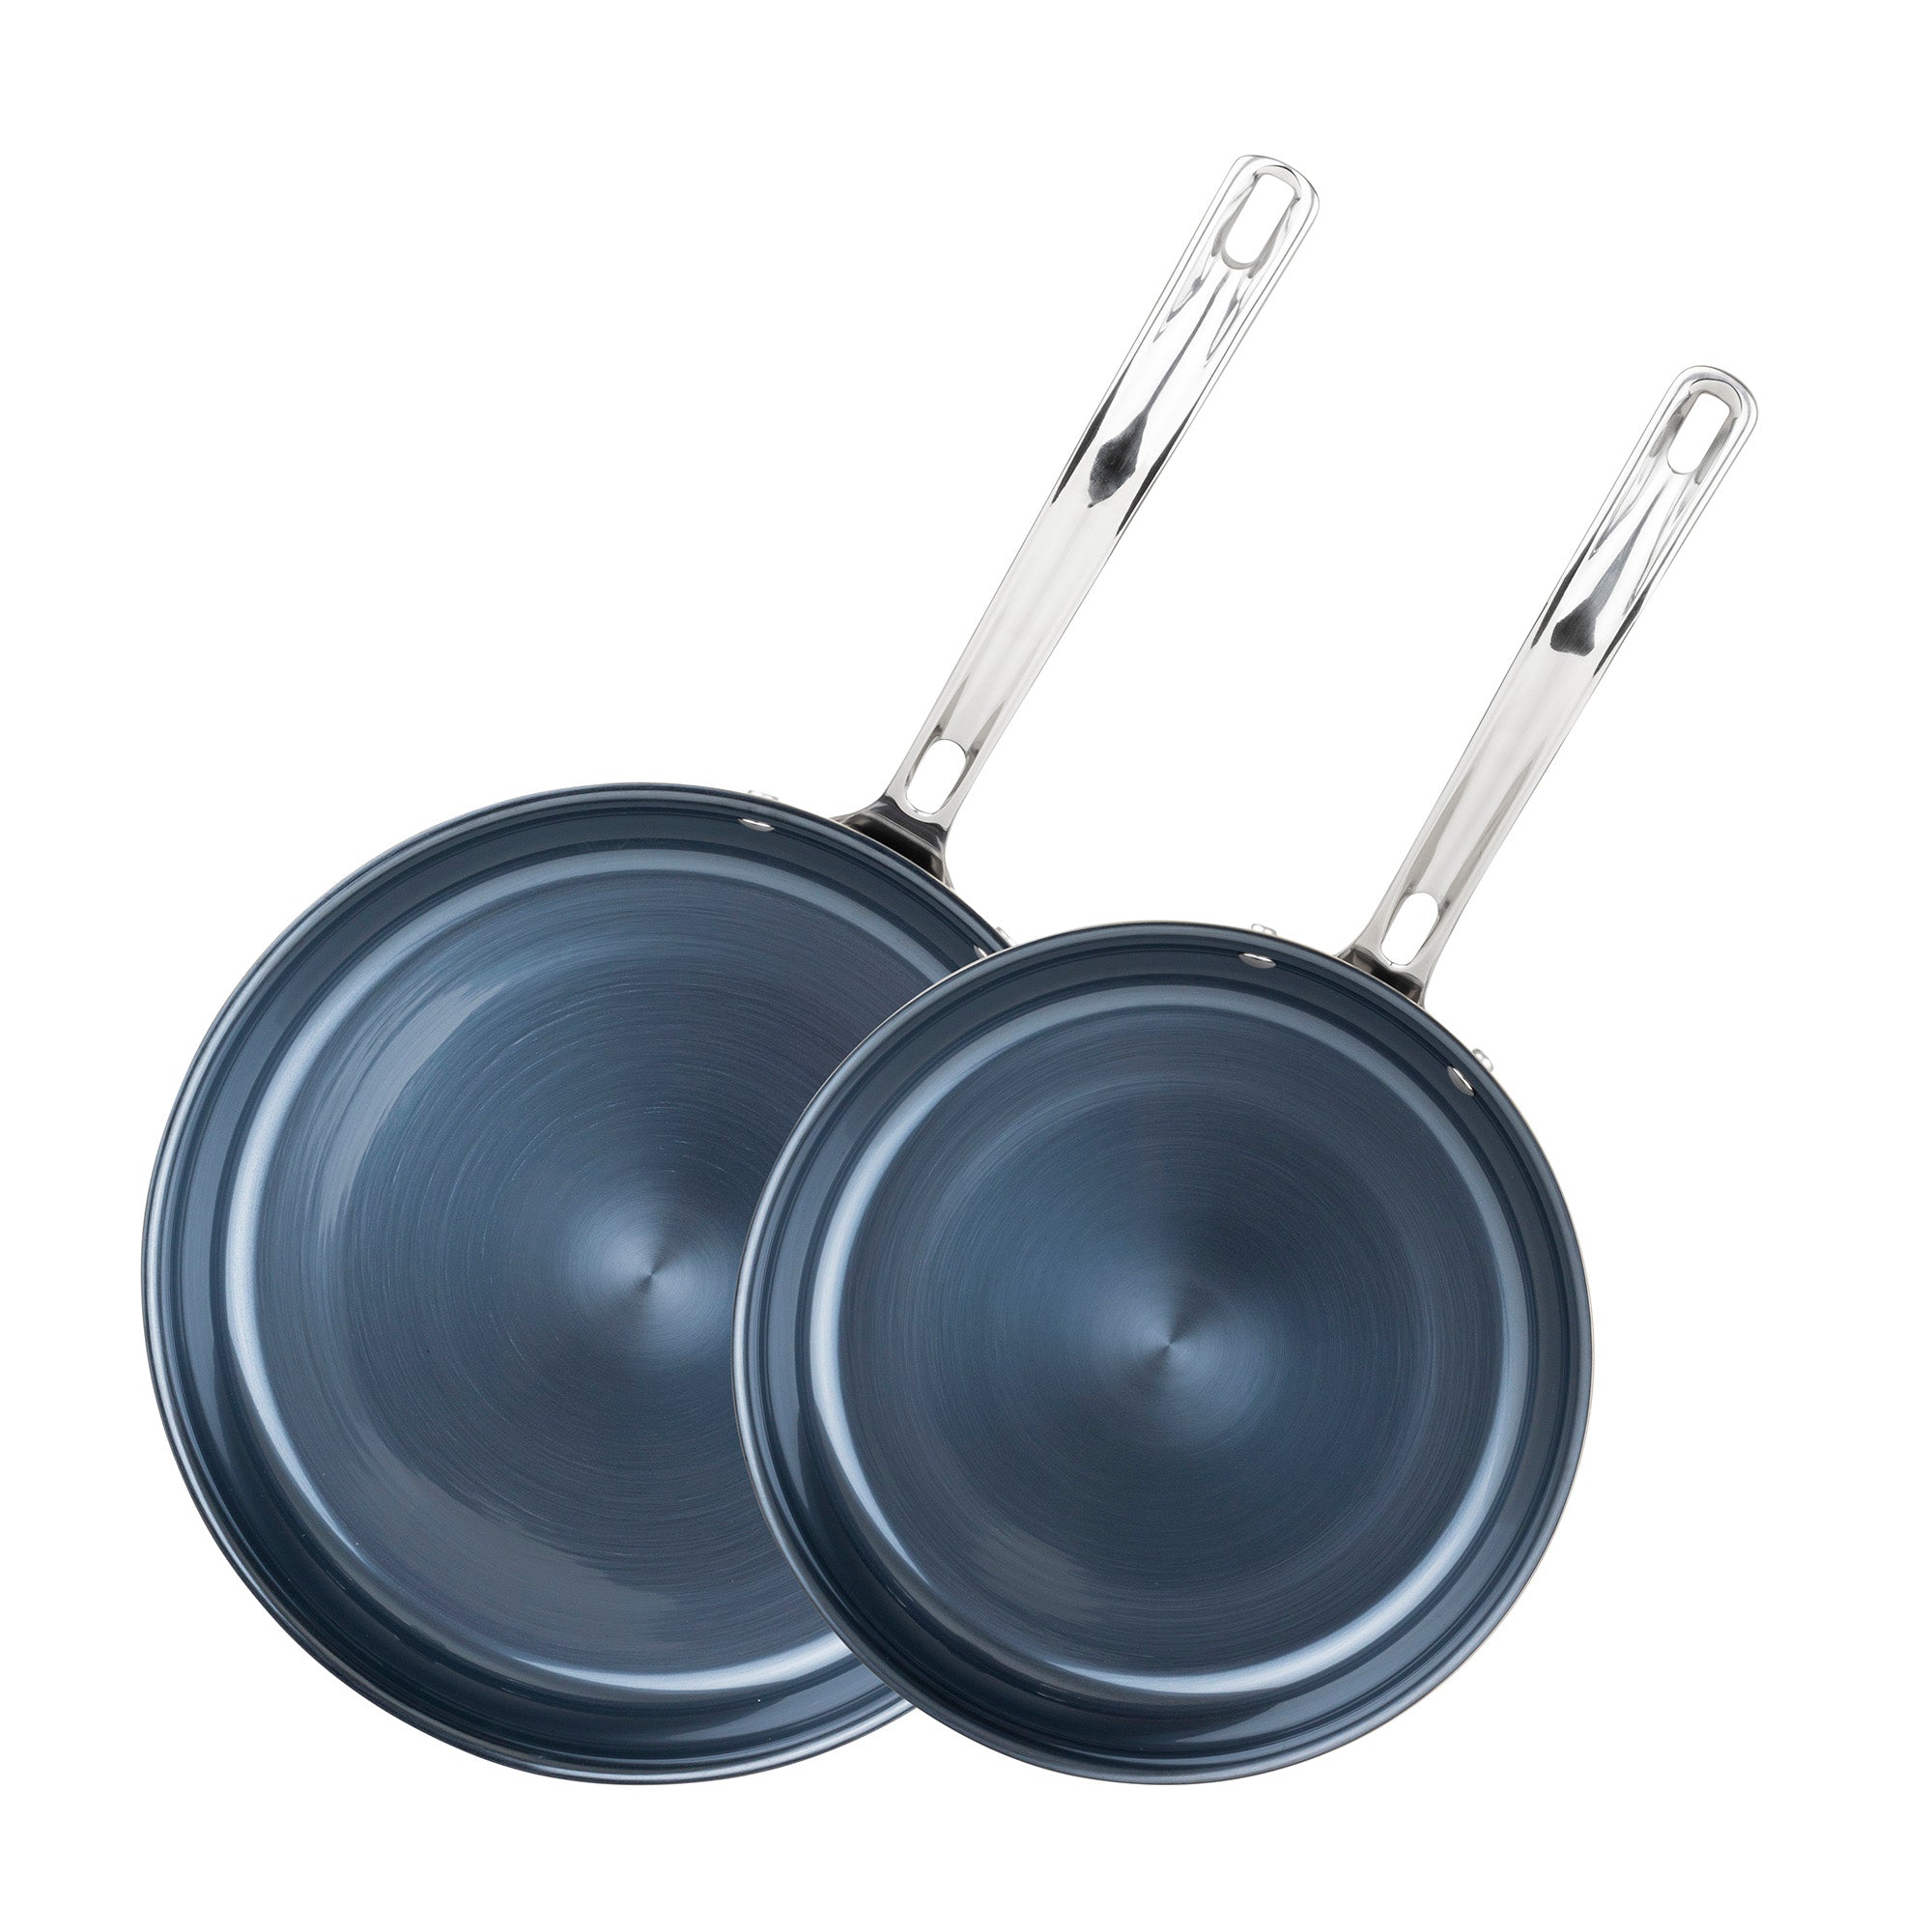 Blue Diamond Cookware Triple Steel Ceramic Nonstick Frying Pan Set, 9.5 inch and 11 inch Fry Pans